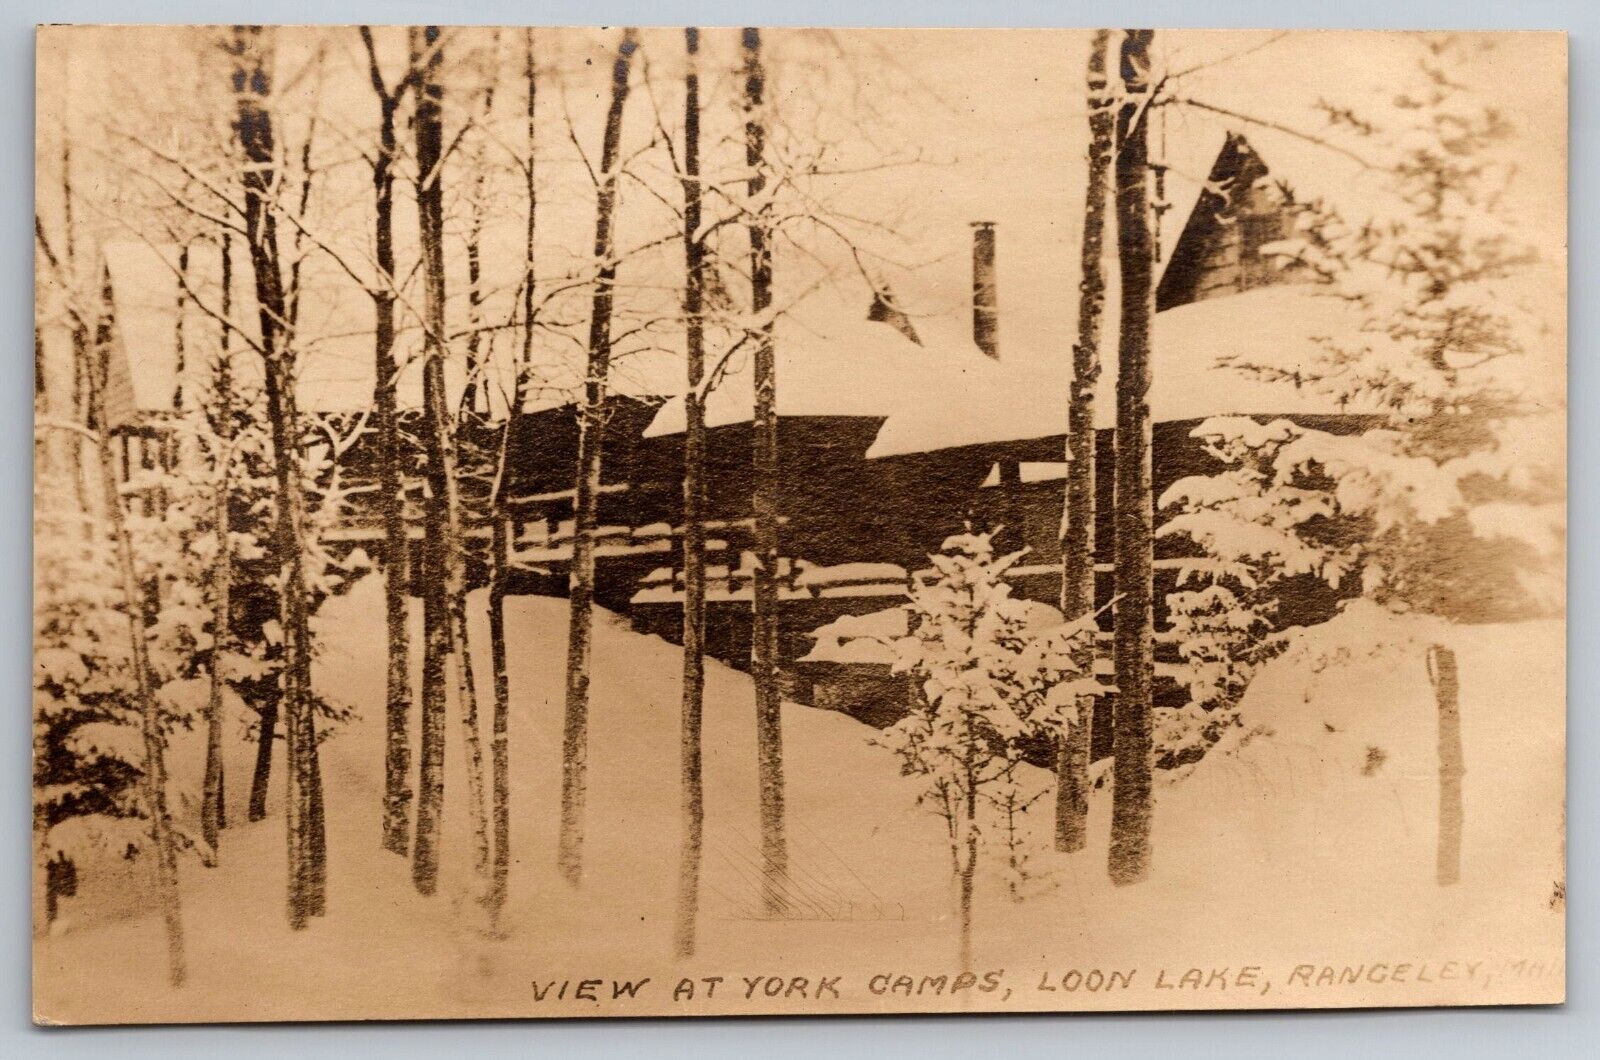 View at York Camps. Loon Lake. Rangeley Maine Real Photo Postcard. RPPC